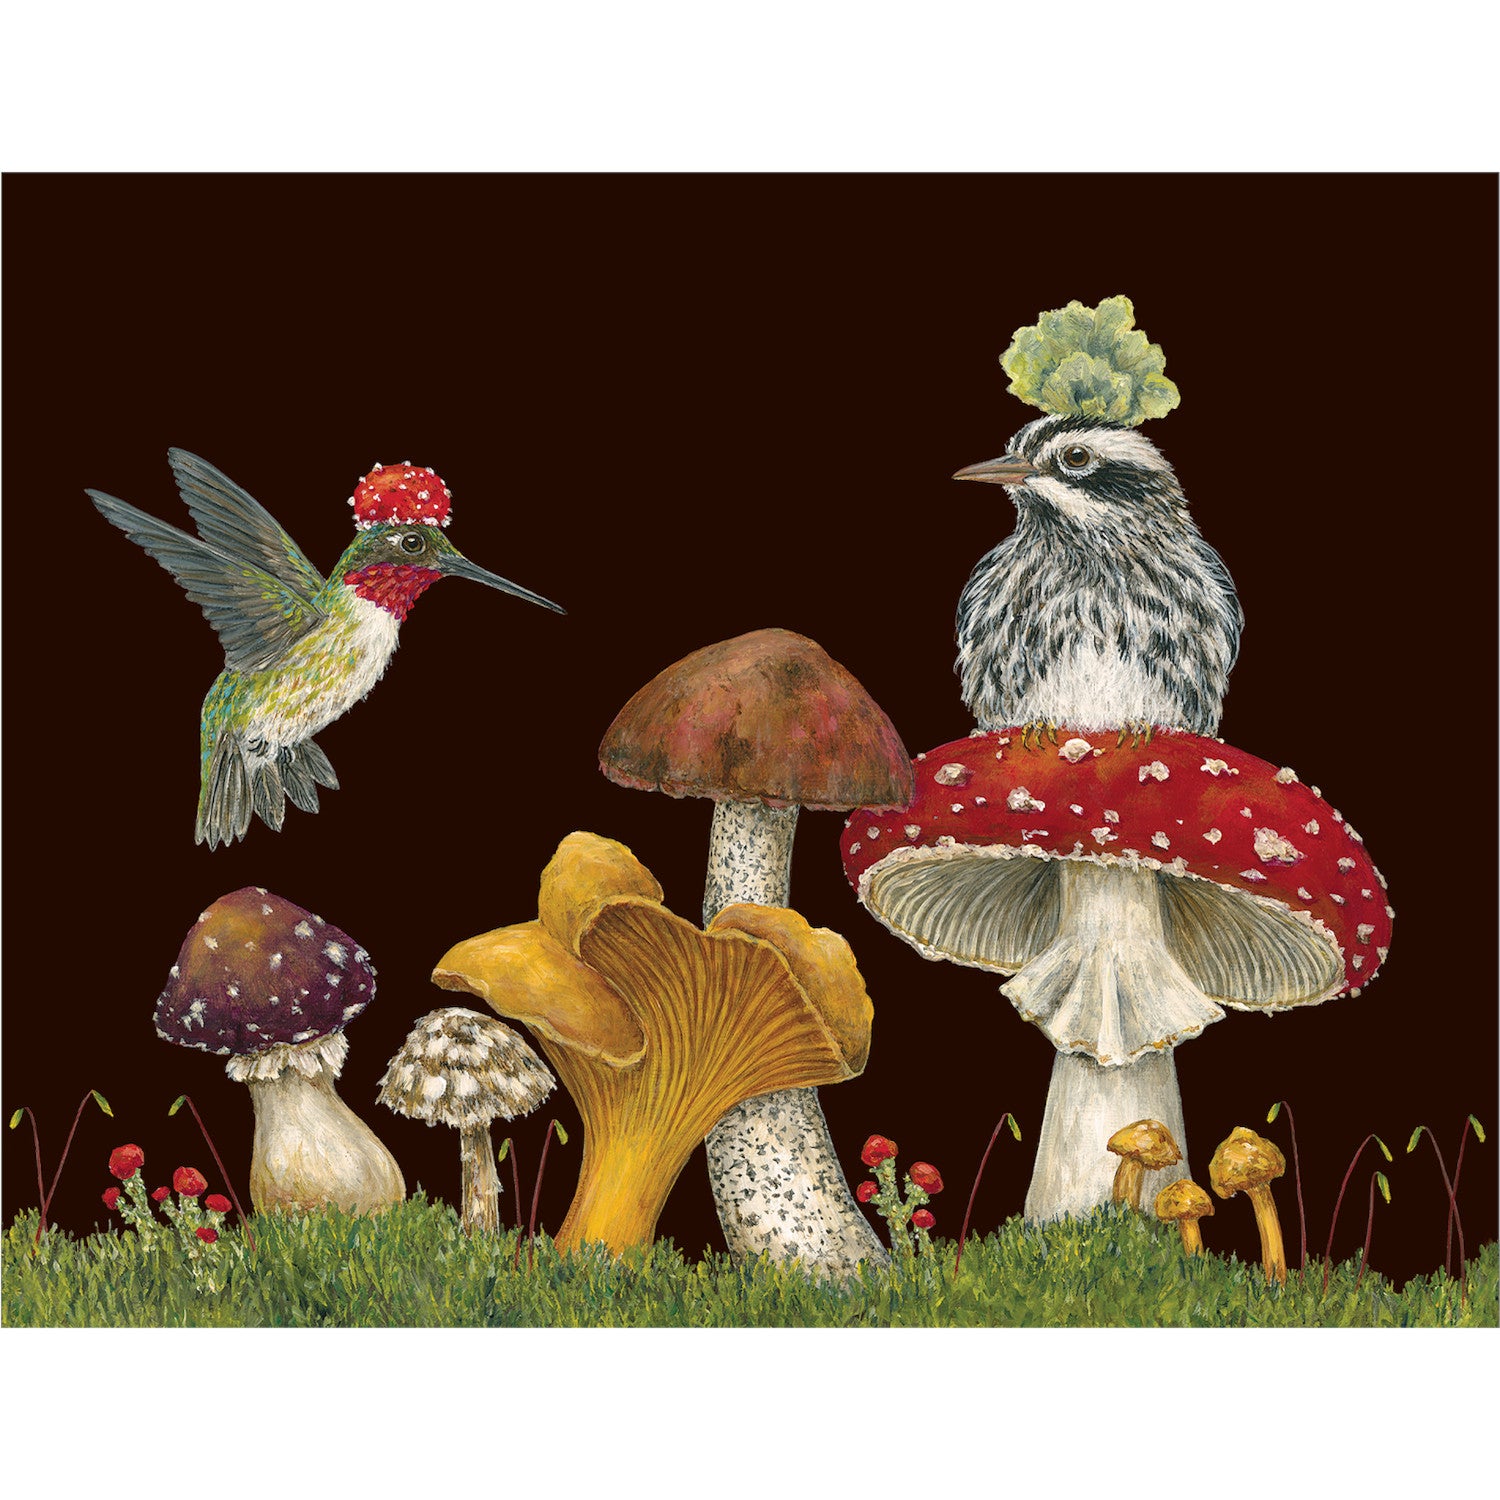 Two Fun Guys card featuring artwork of hummingbirds and mushrooms on a brown background, with a special message, by Hester &amp; Cook.